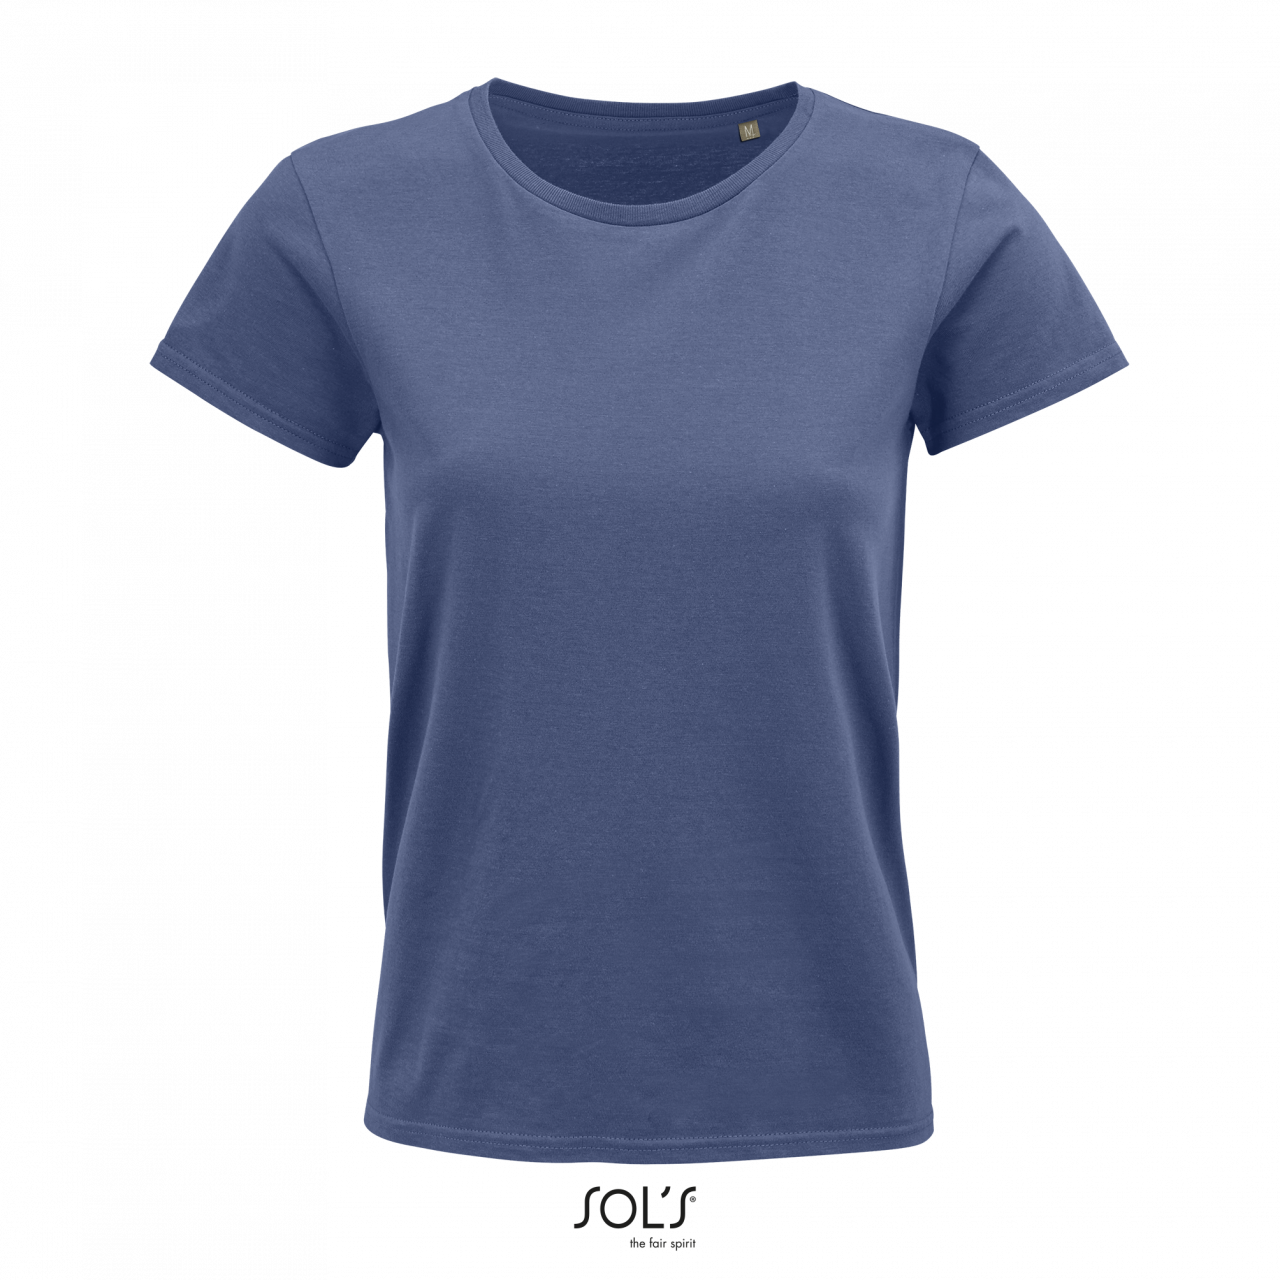 Sol's Crusader Women - Round-neck Fitted Jersey T-shirt - Sol's Crusader Women - Round-neck Fitted Jersey T-shirt - Blue Dusk